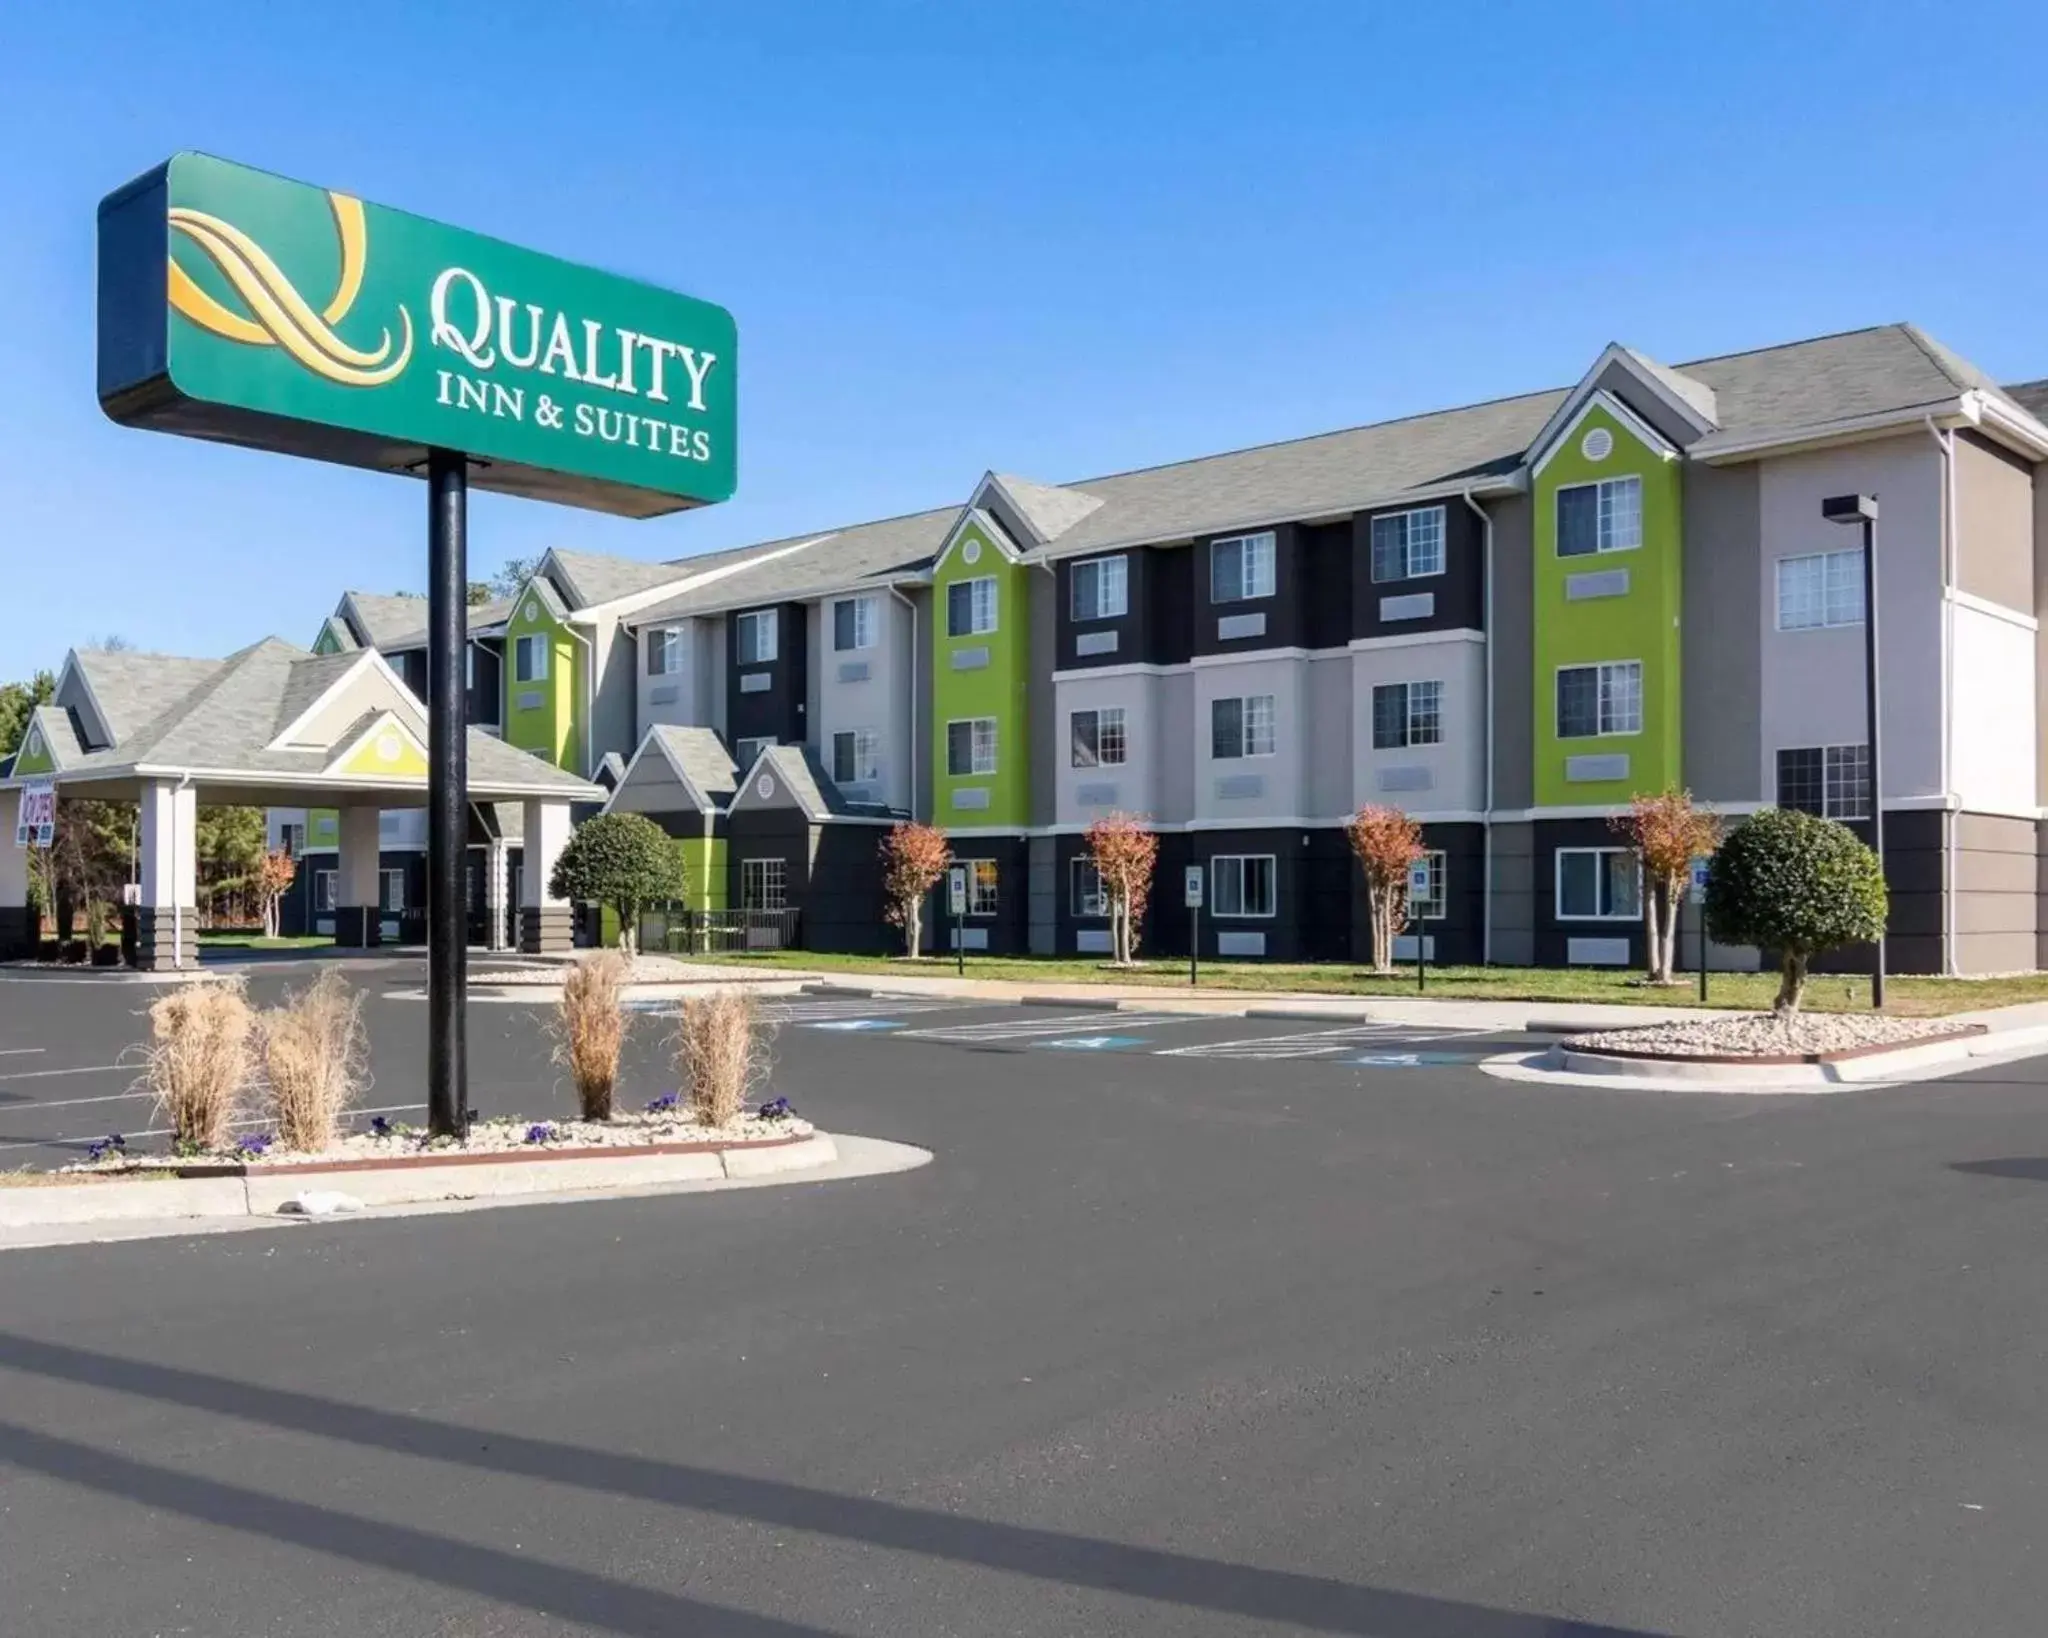 Property building in Quality Inn & Suites Ashland near Kings Dominion